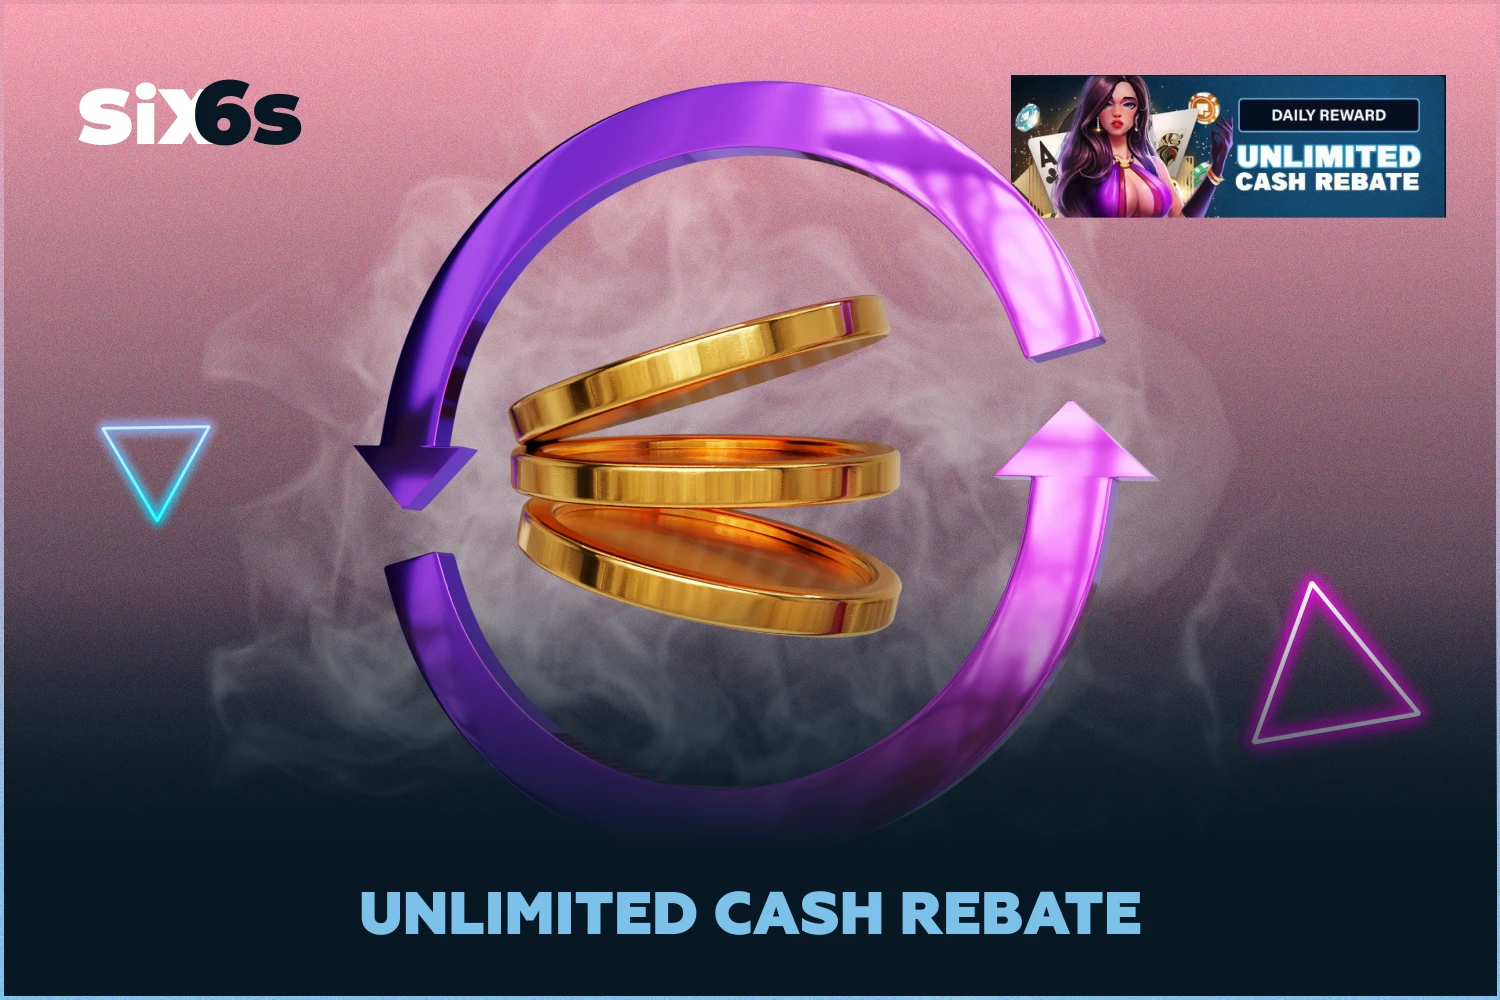 Players from Bangladesh can bet at Six6s in the Live Casino and Table Games sections and receive a Cash Rebate of 0.3% to 0.5%